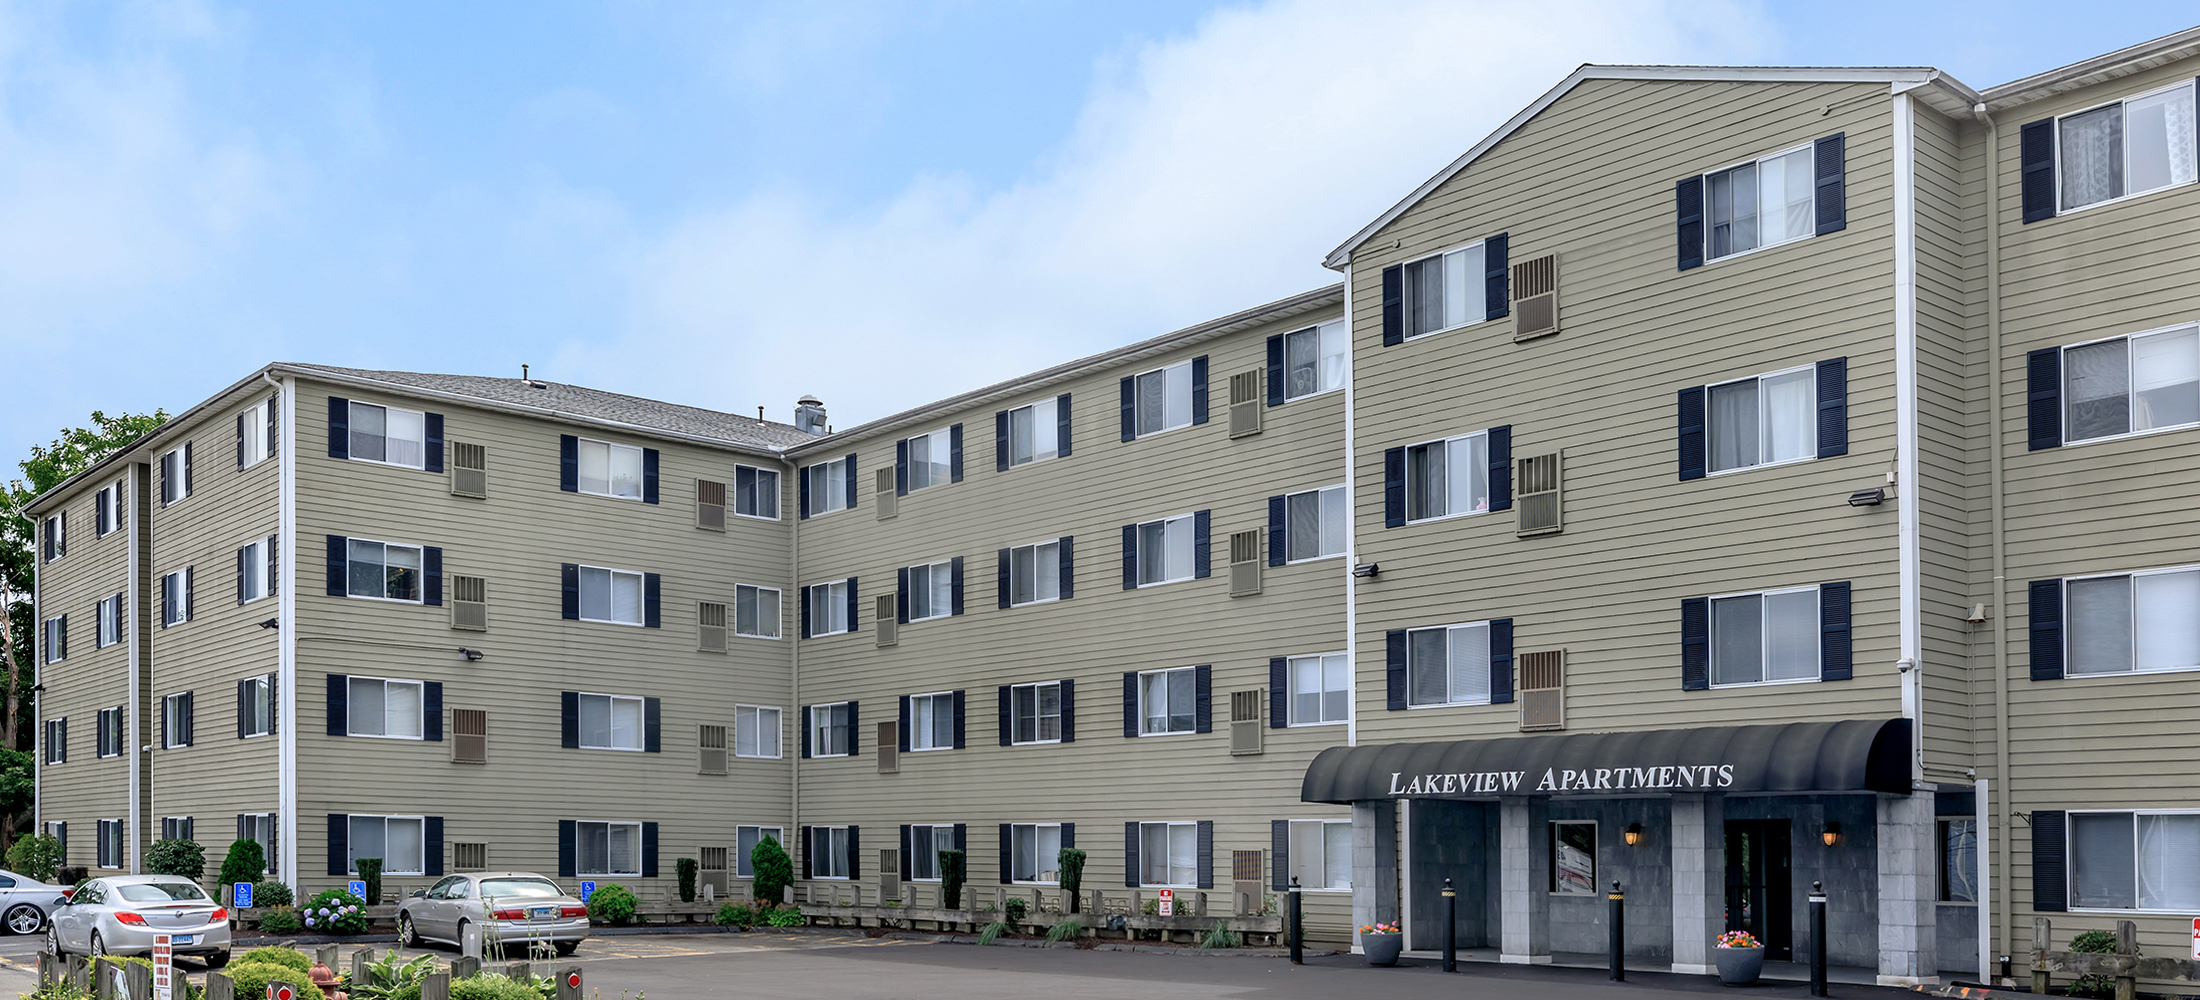 Lakeview Apartments In Waterbury Ct